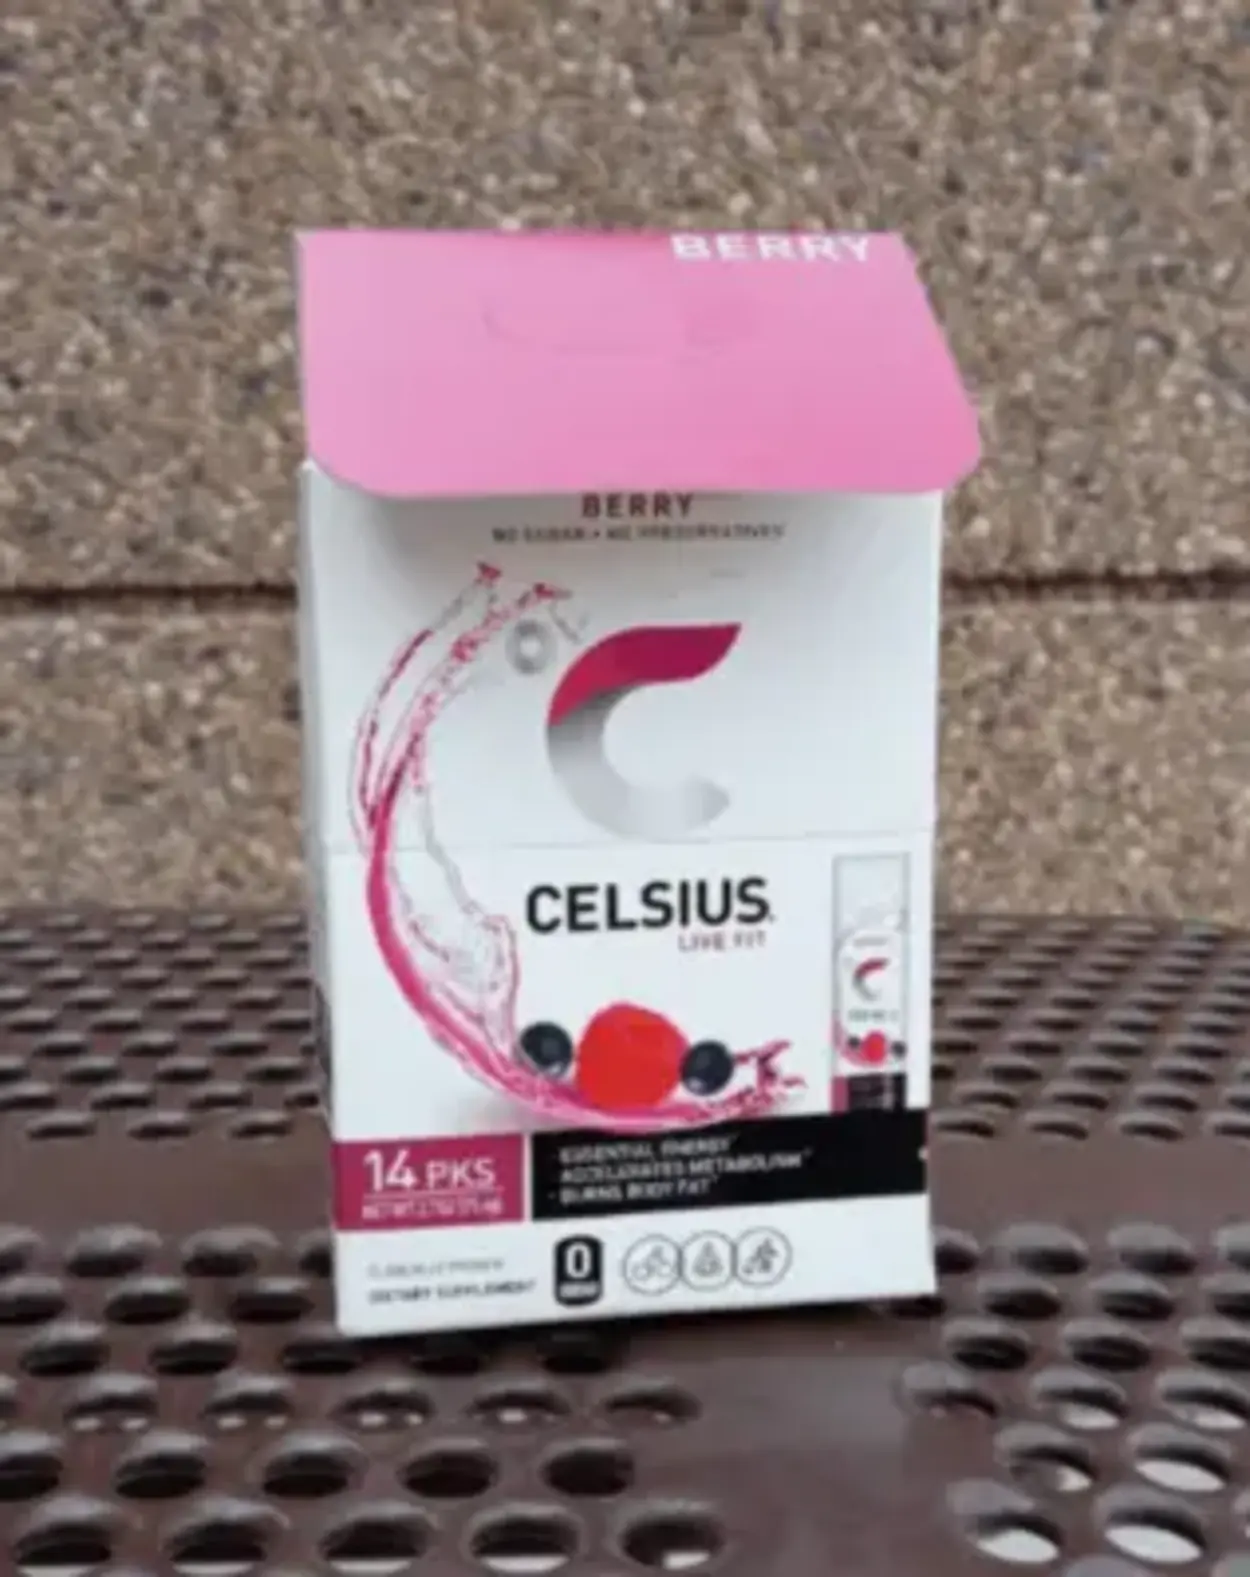 How Many Celsius On-the-Go Can You Drink In A Day? (Answered)